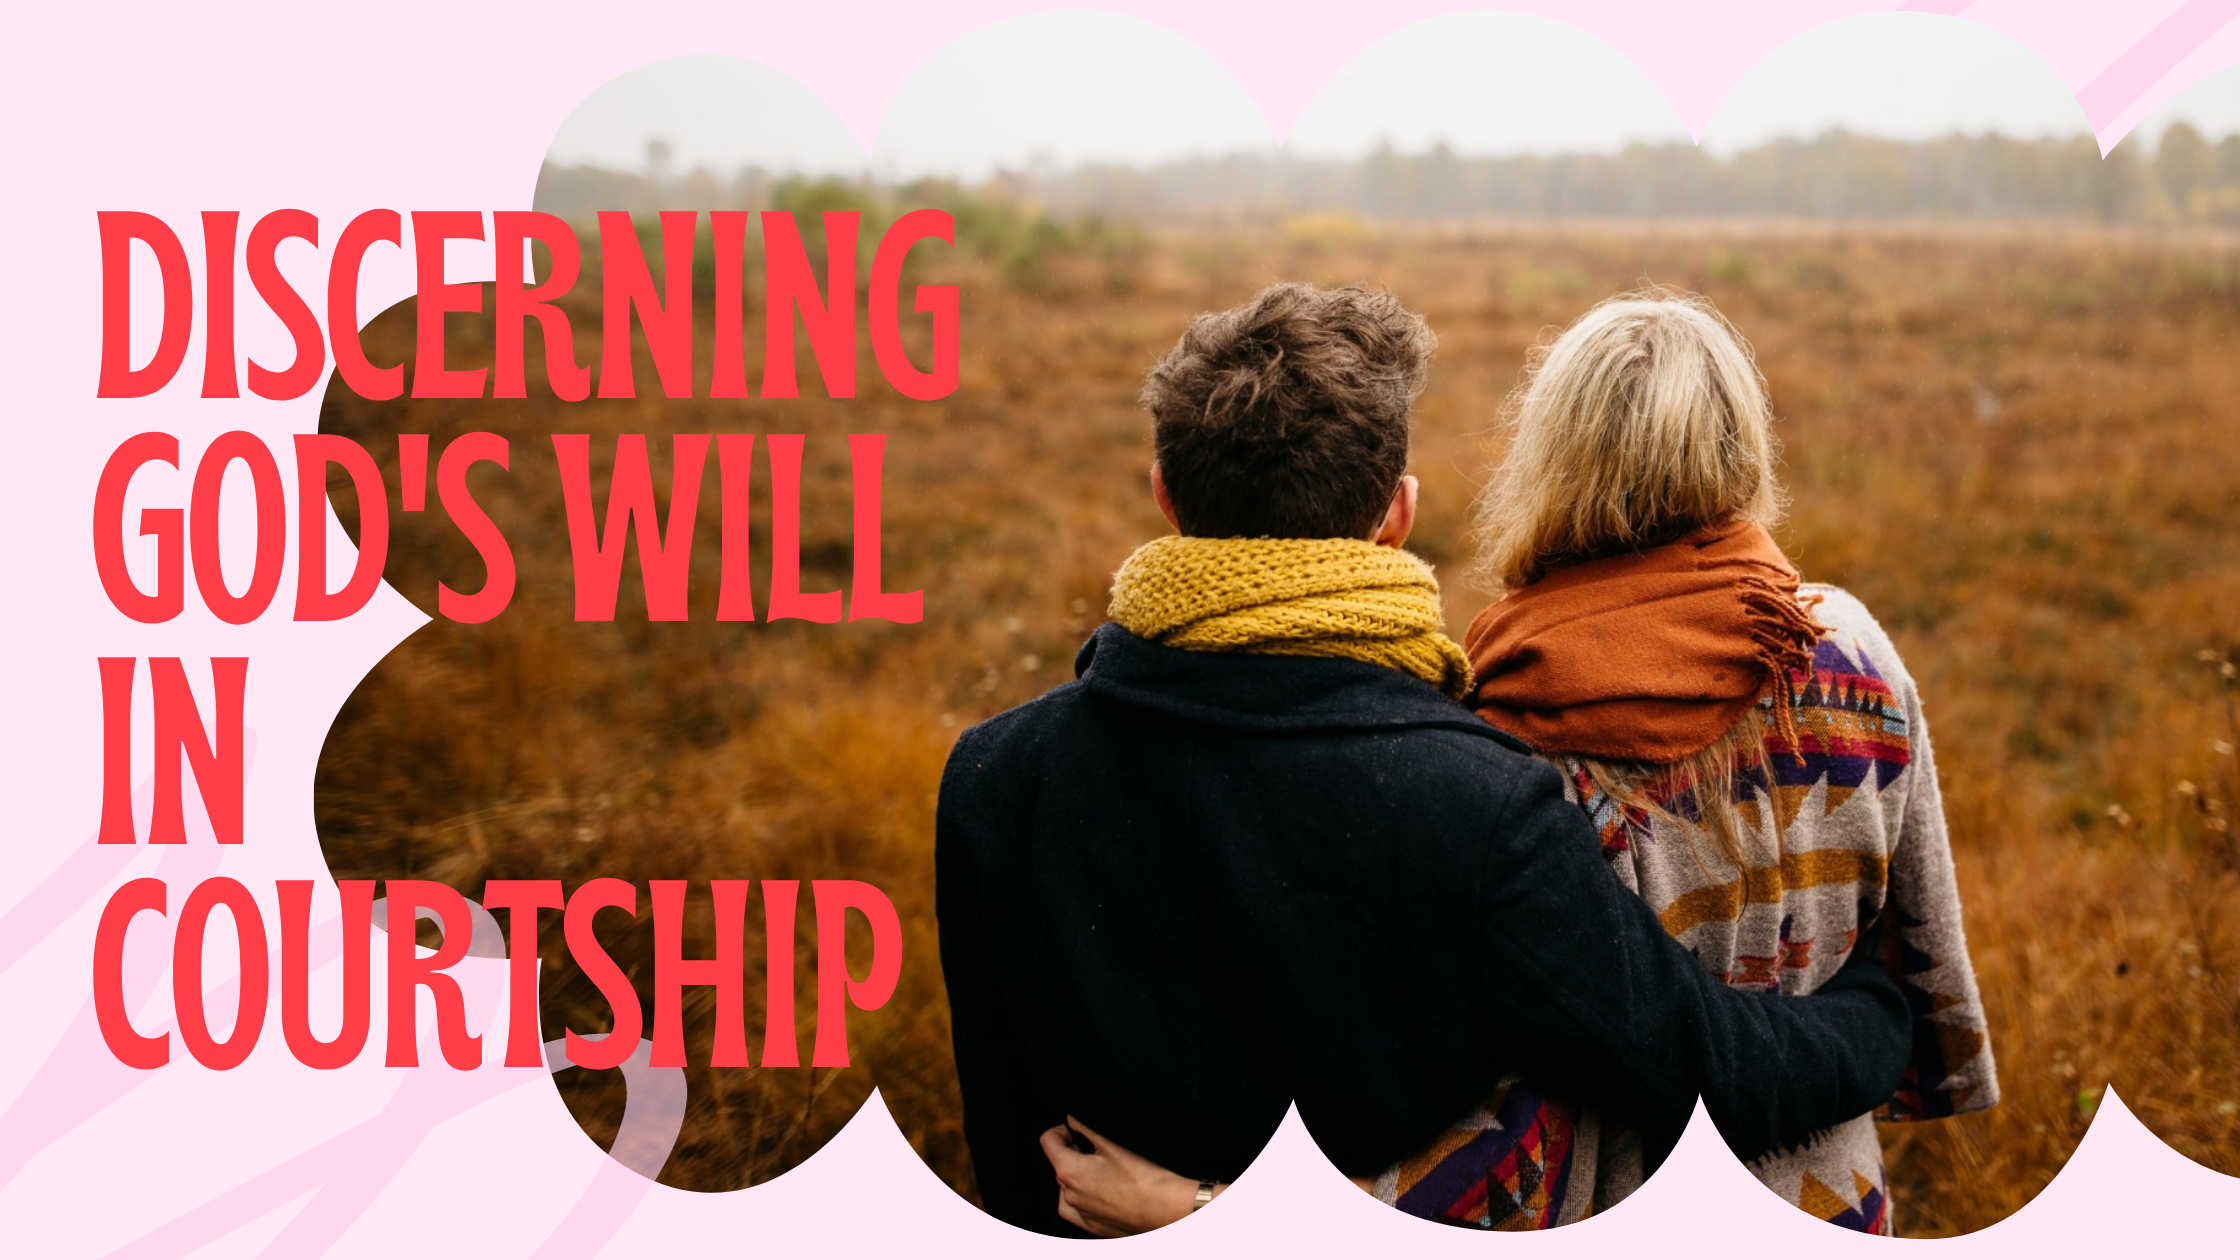 Discerning God's will in courtship